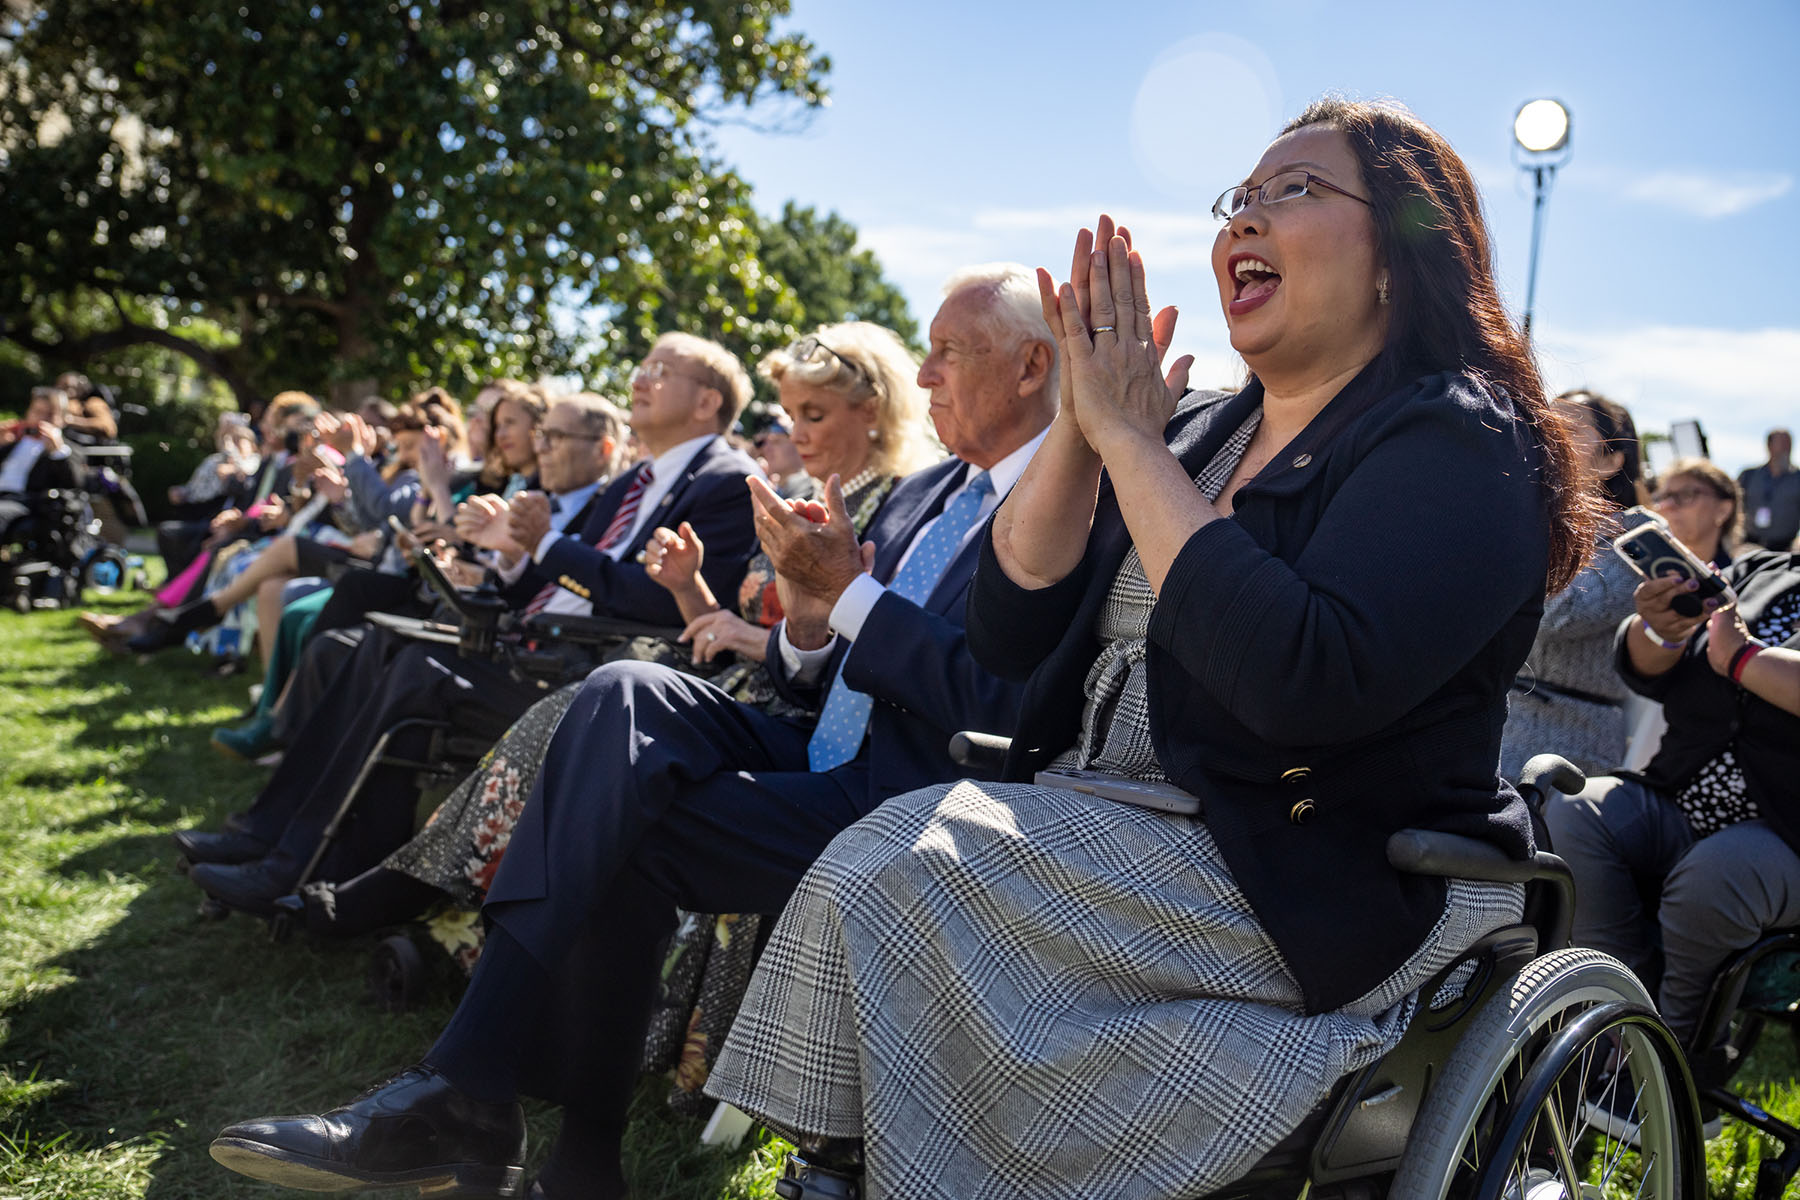 Senator Tammy Duckworth attends last year's event celebrating the anniversary of the Americans with Disabilities Act in the Rose Garden of the White House.